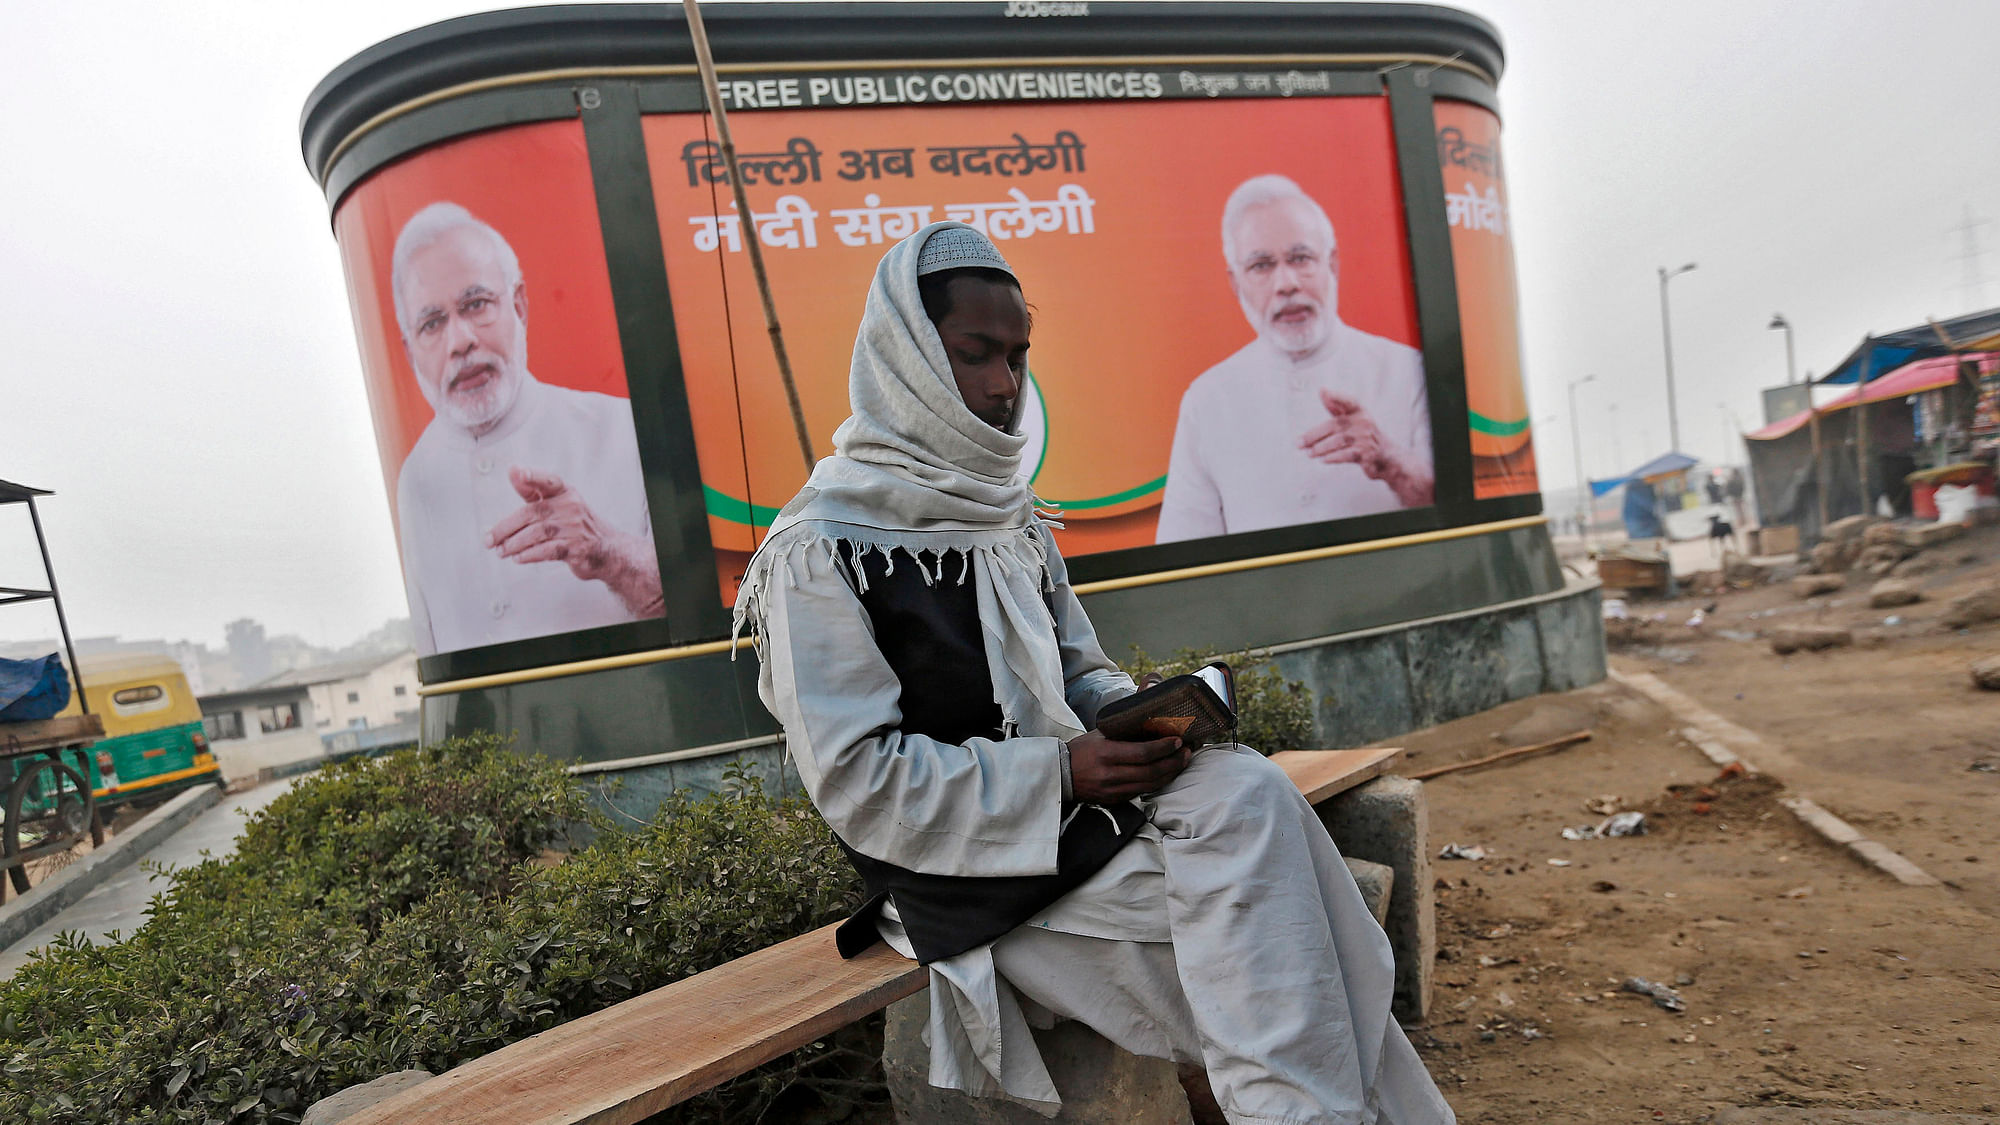 A Muslim man reads the Koran as he sits in front of a billboard featuring India’s Prime Minister Narendra Modi on a pavement along a road in New Delhi January 20, 2015. 